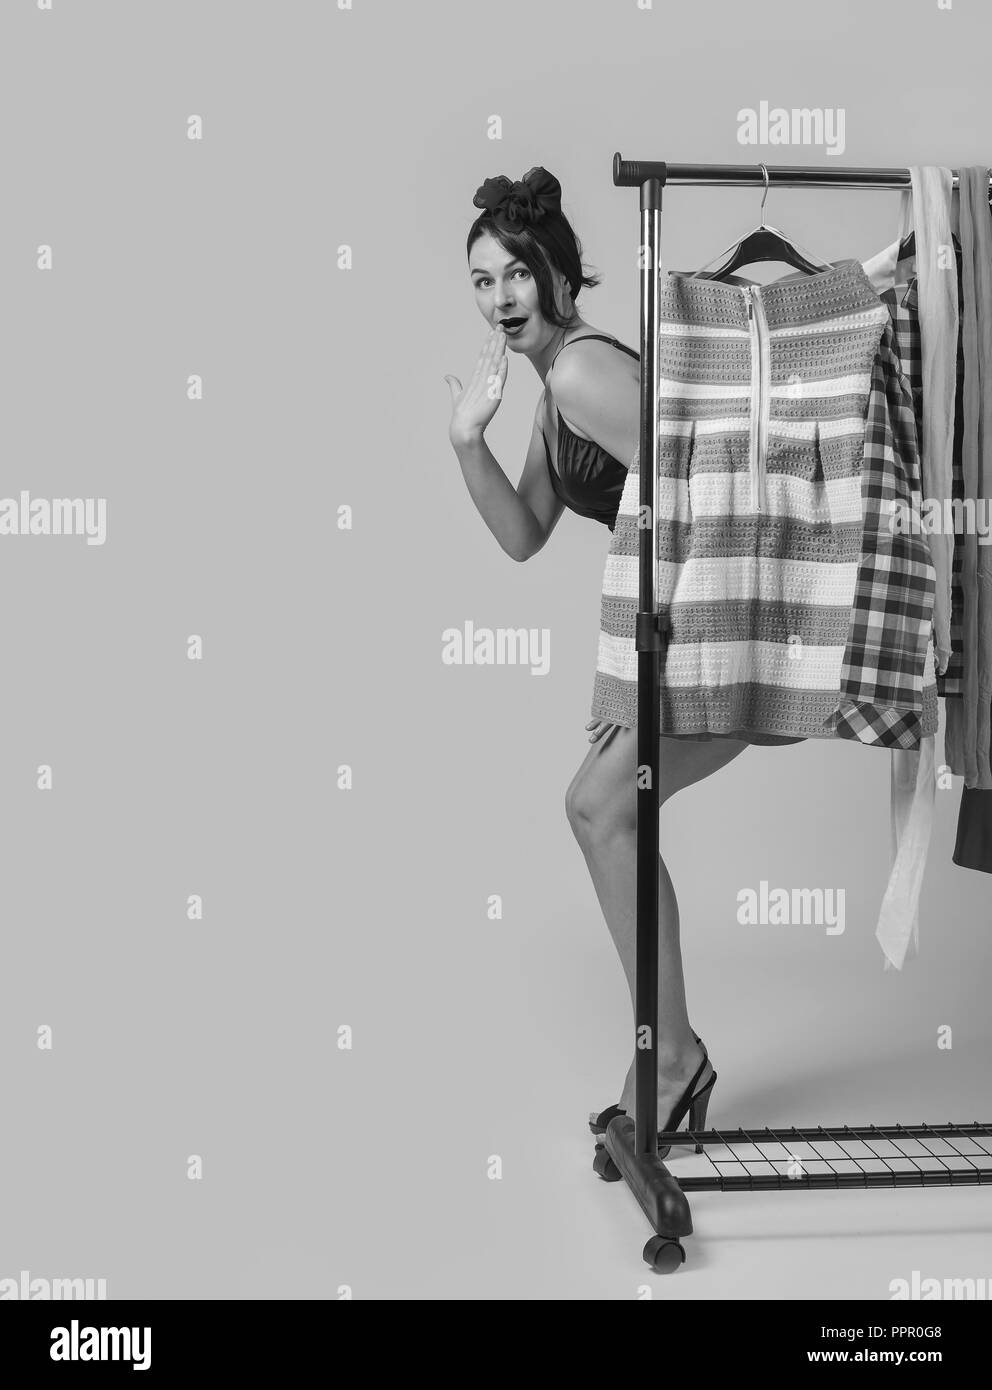 Portrait of beautiful surprised woman in black bikini , standing near hangers with clothes, thinking over what to buy. Black and white. Stock Photo